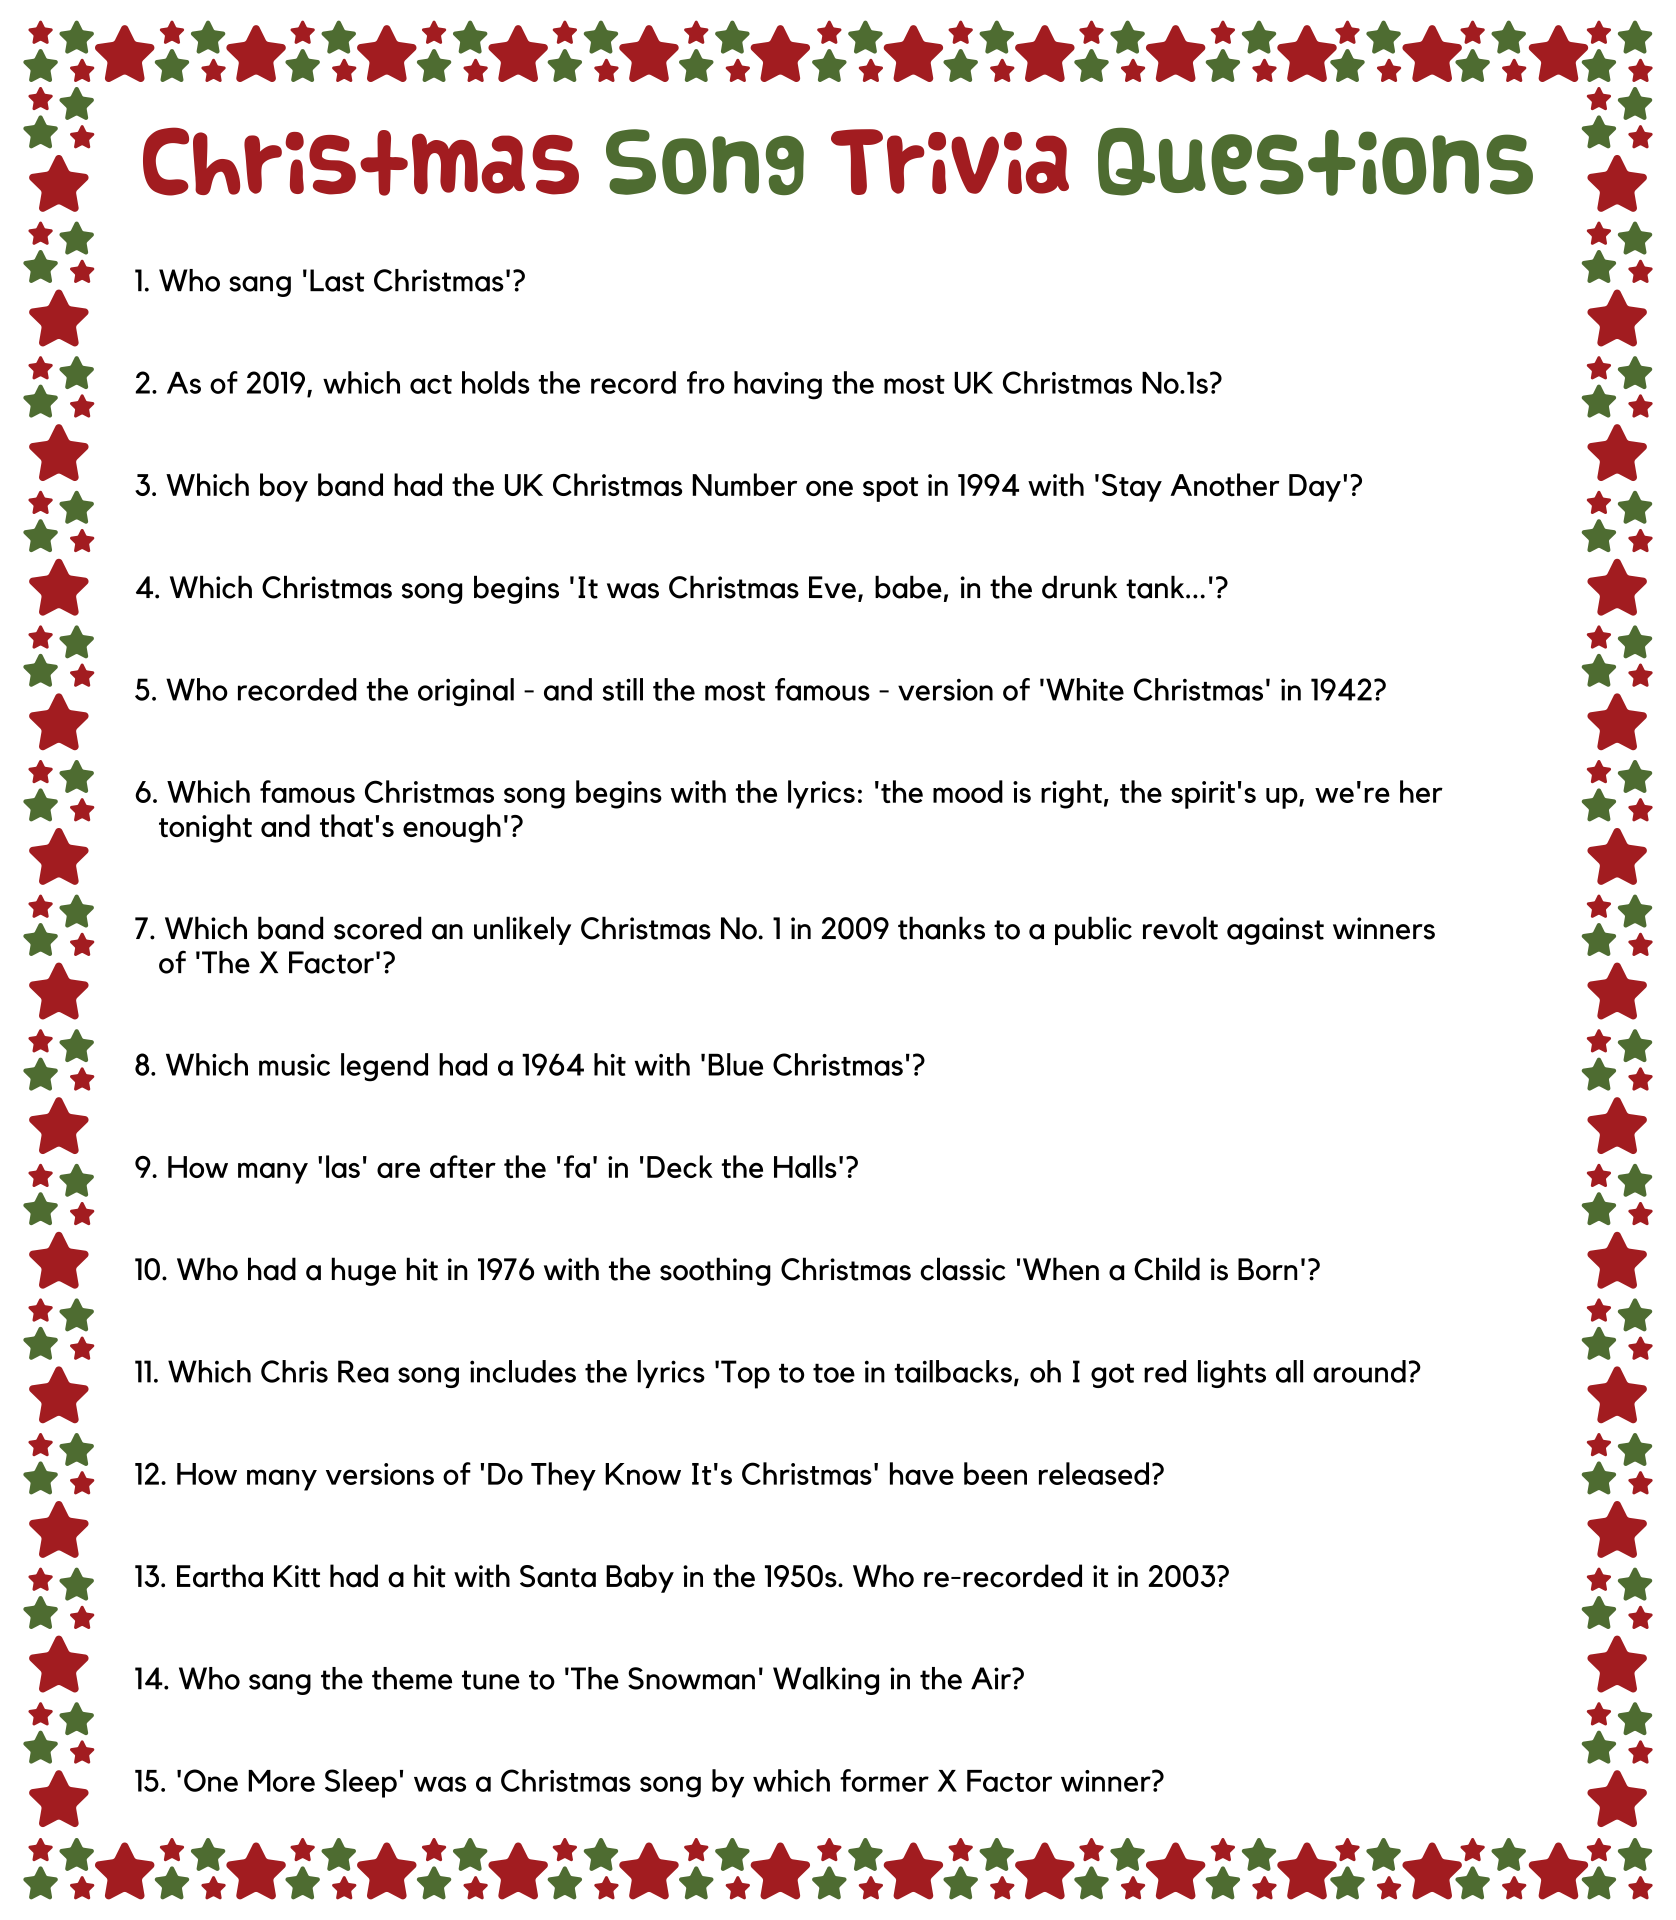 free-christmas-trivia-questions-and-answers-printable